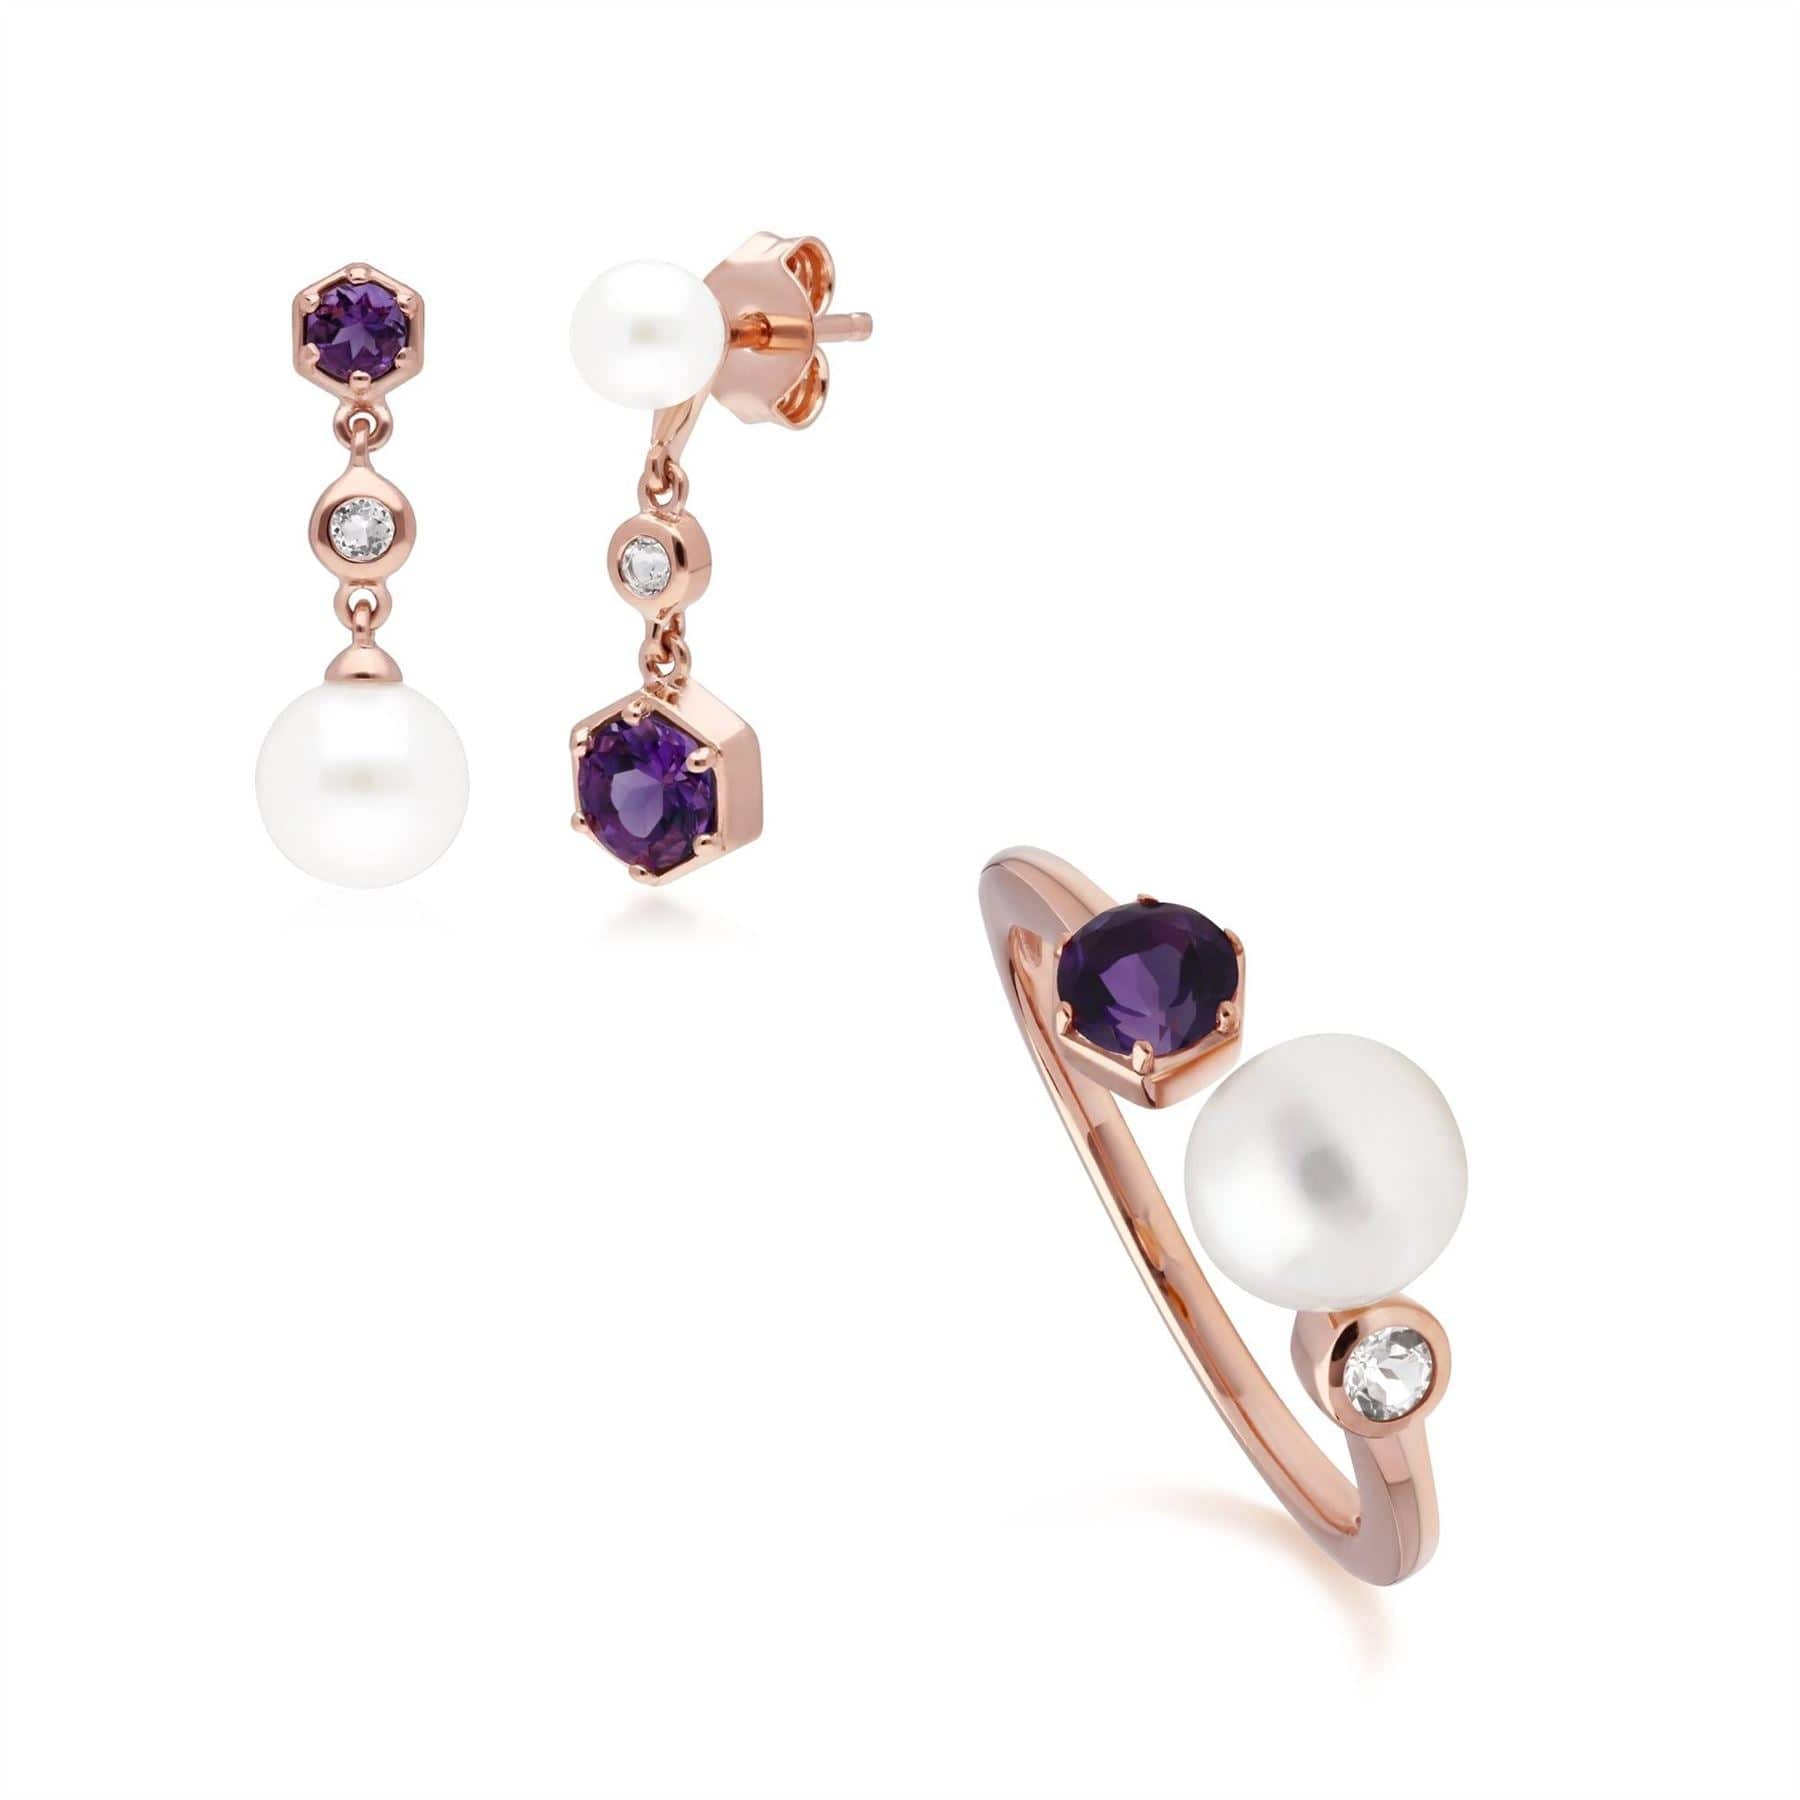 Image of Modern Pearl, Amethyst & Topaz Earring & Ring Set in Rose Gold Plated Silver